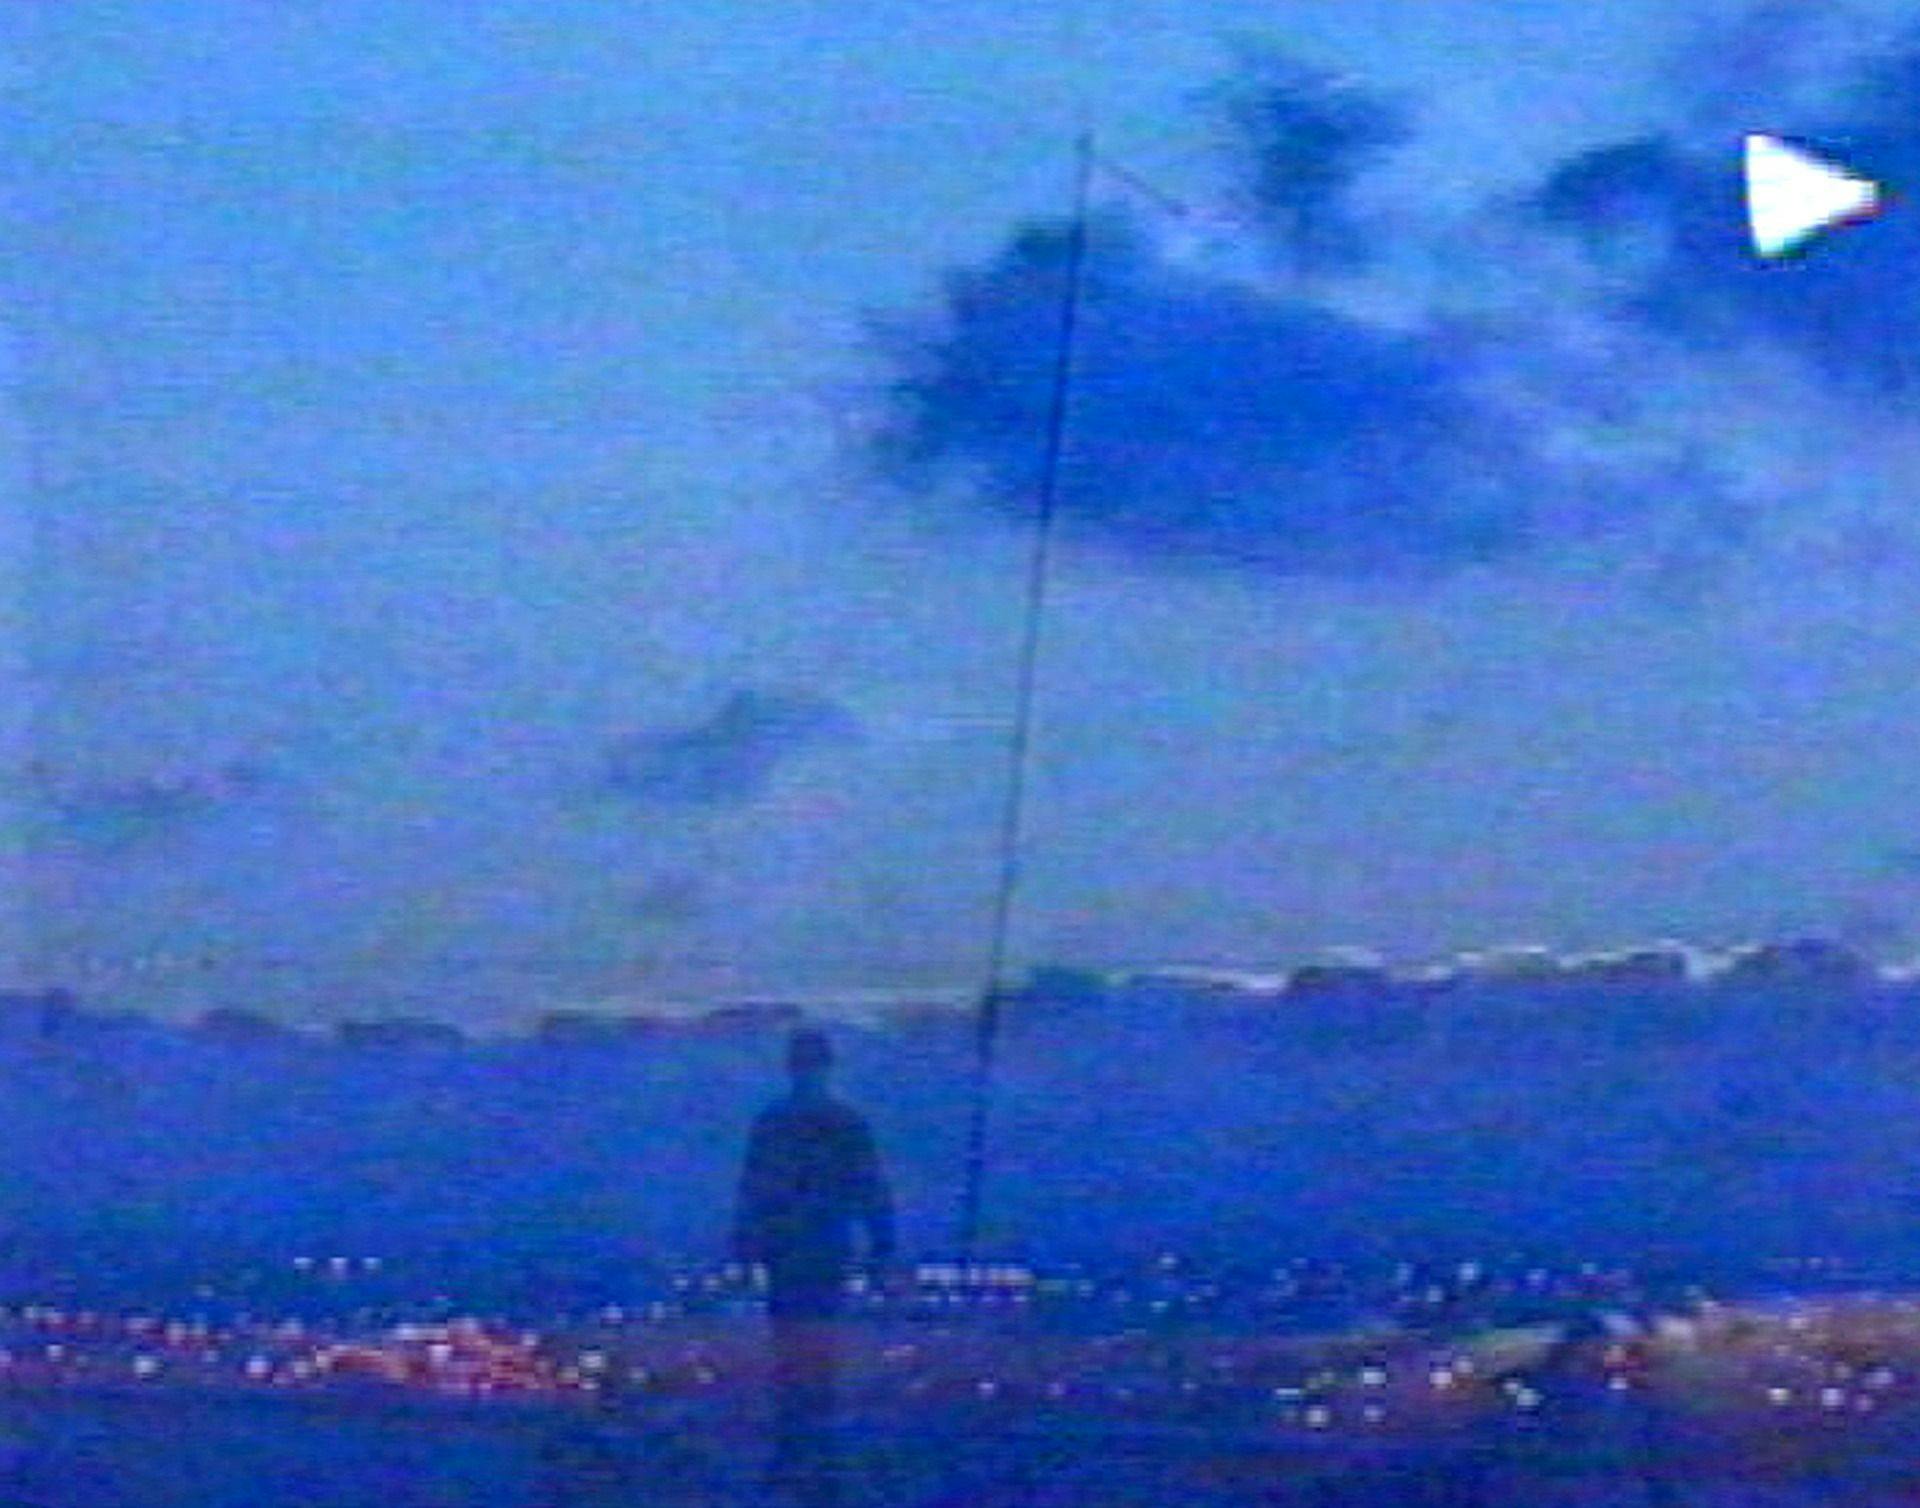 Image of hazy figure in the foreground with city lights on the horizon and a partly cloudy sky above. A play sign appears in the top right corner, as if its an image of a VHS player.